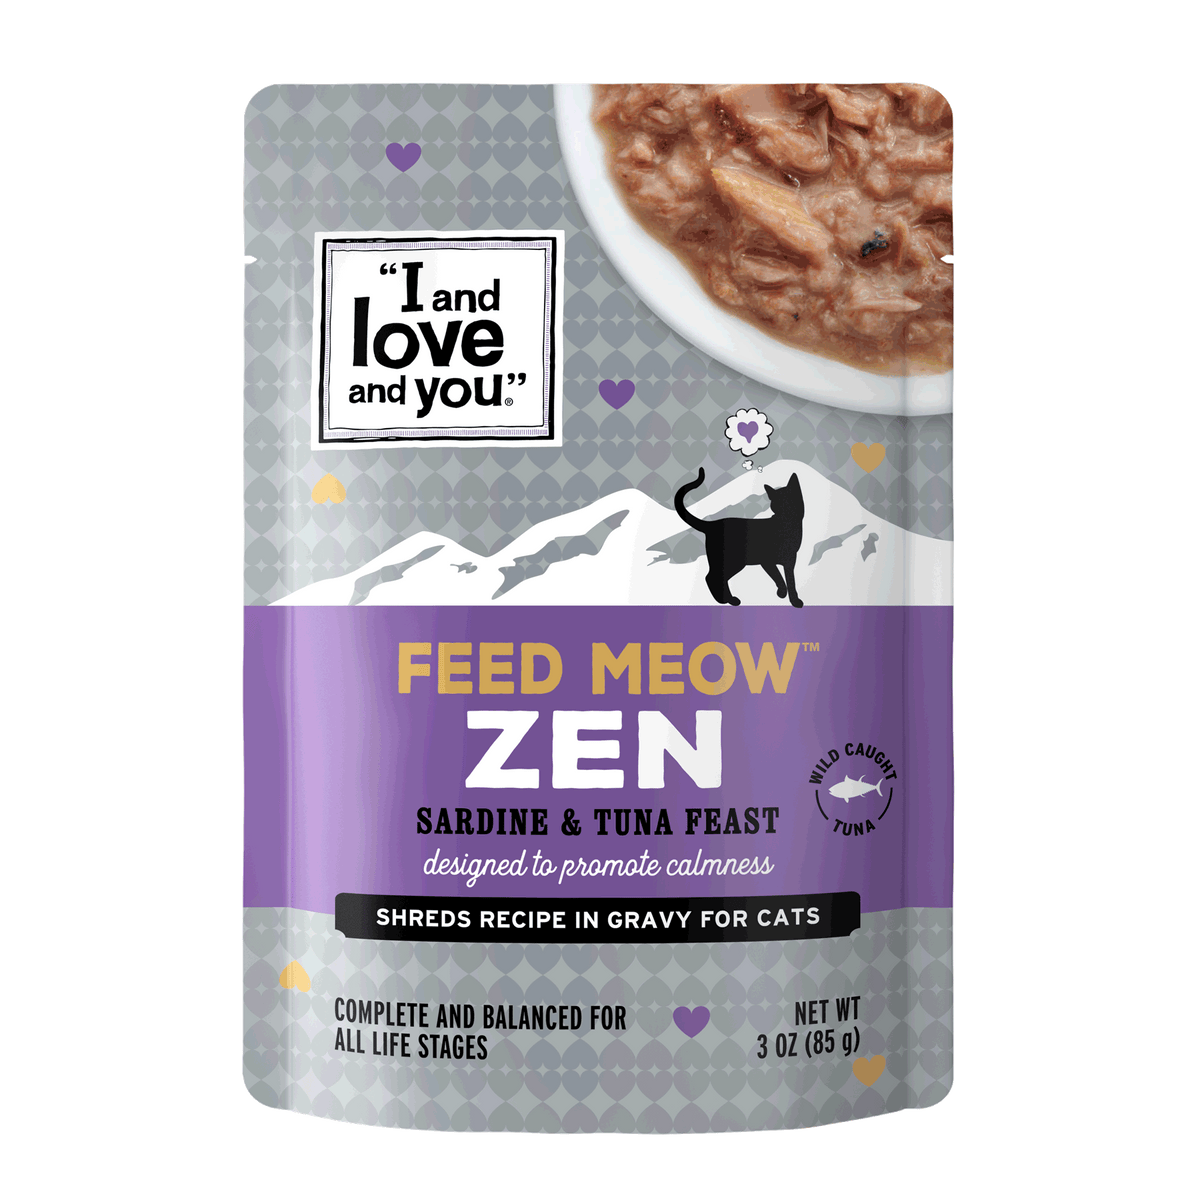 A package of cat food featuring chunky, shredded fish slathered in gravy - Feed Meow Zen Sardine & Tuna Feast.